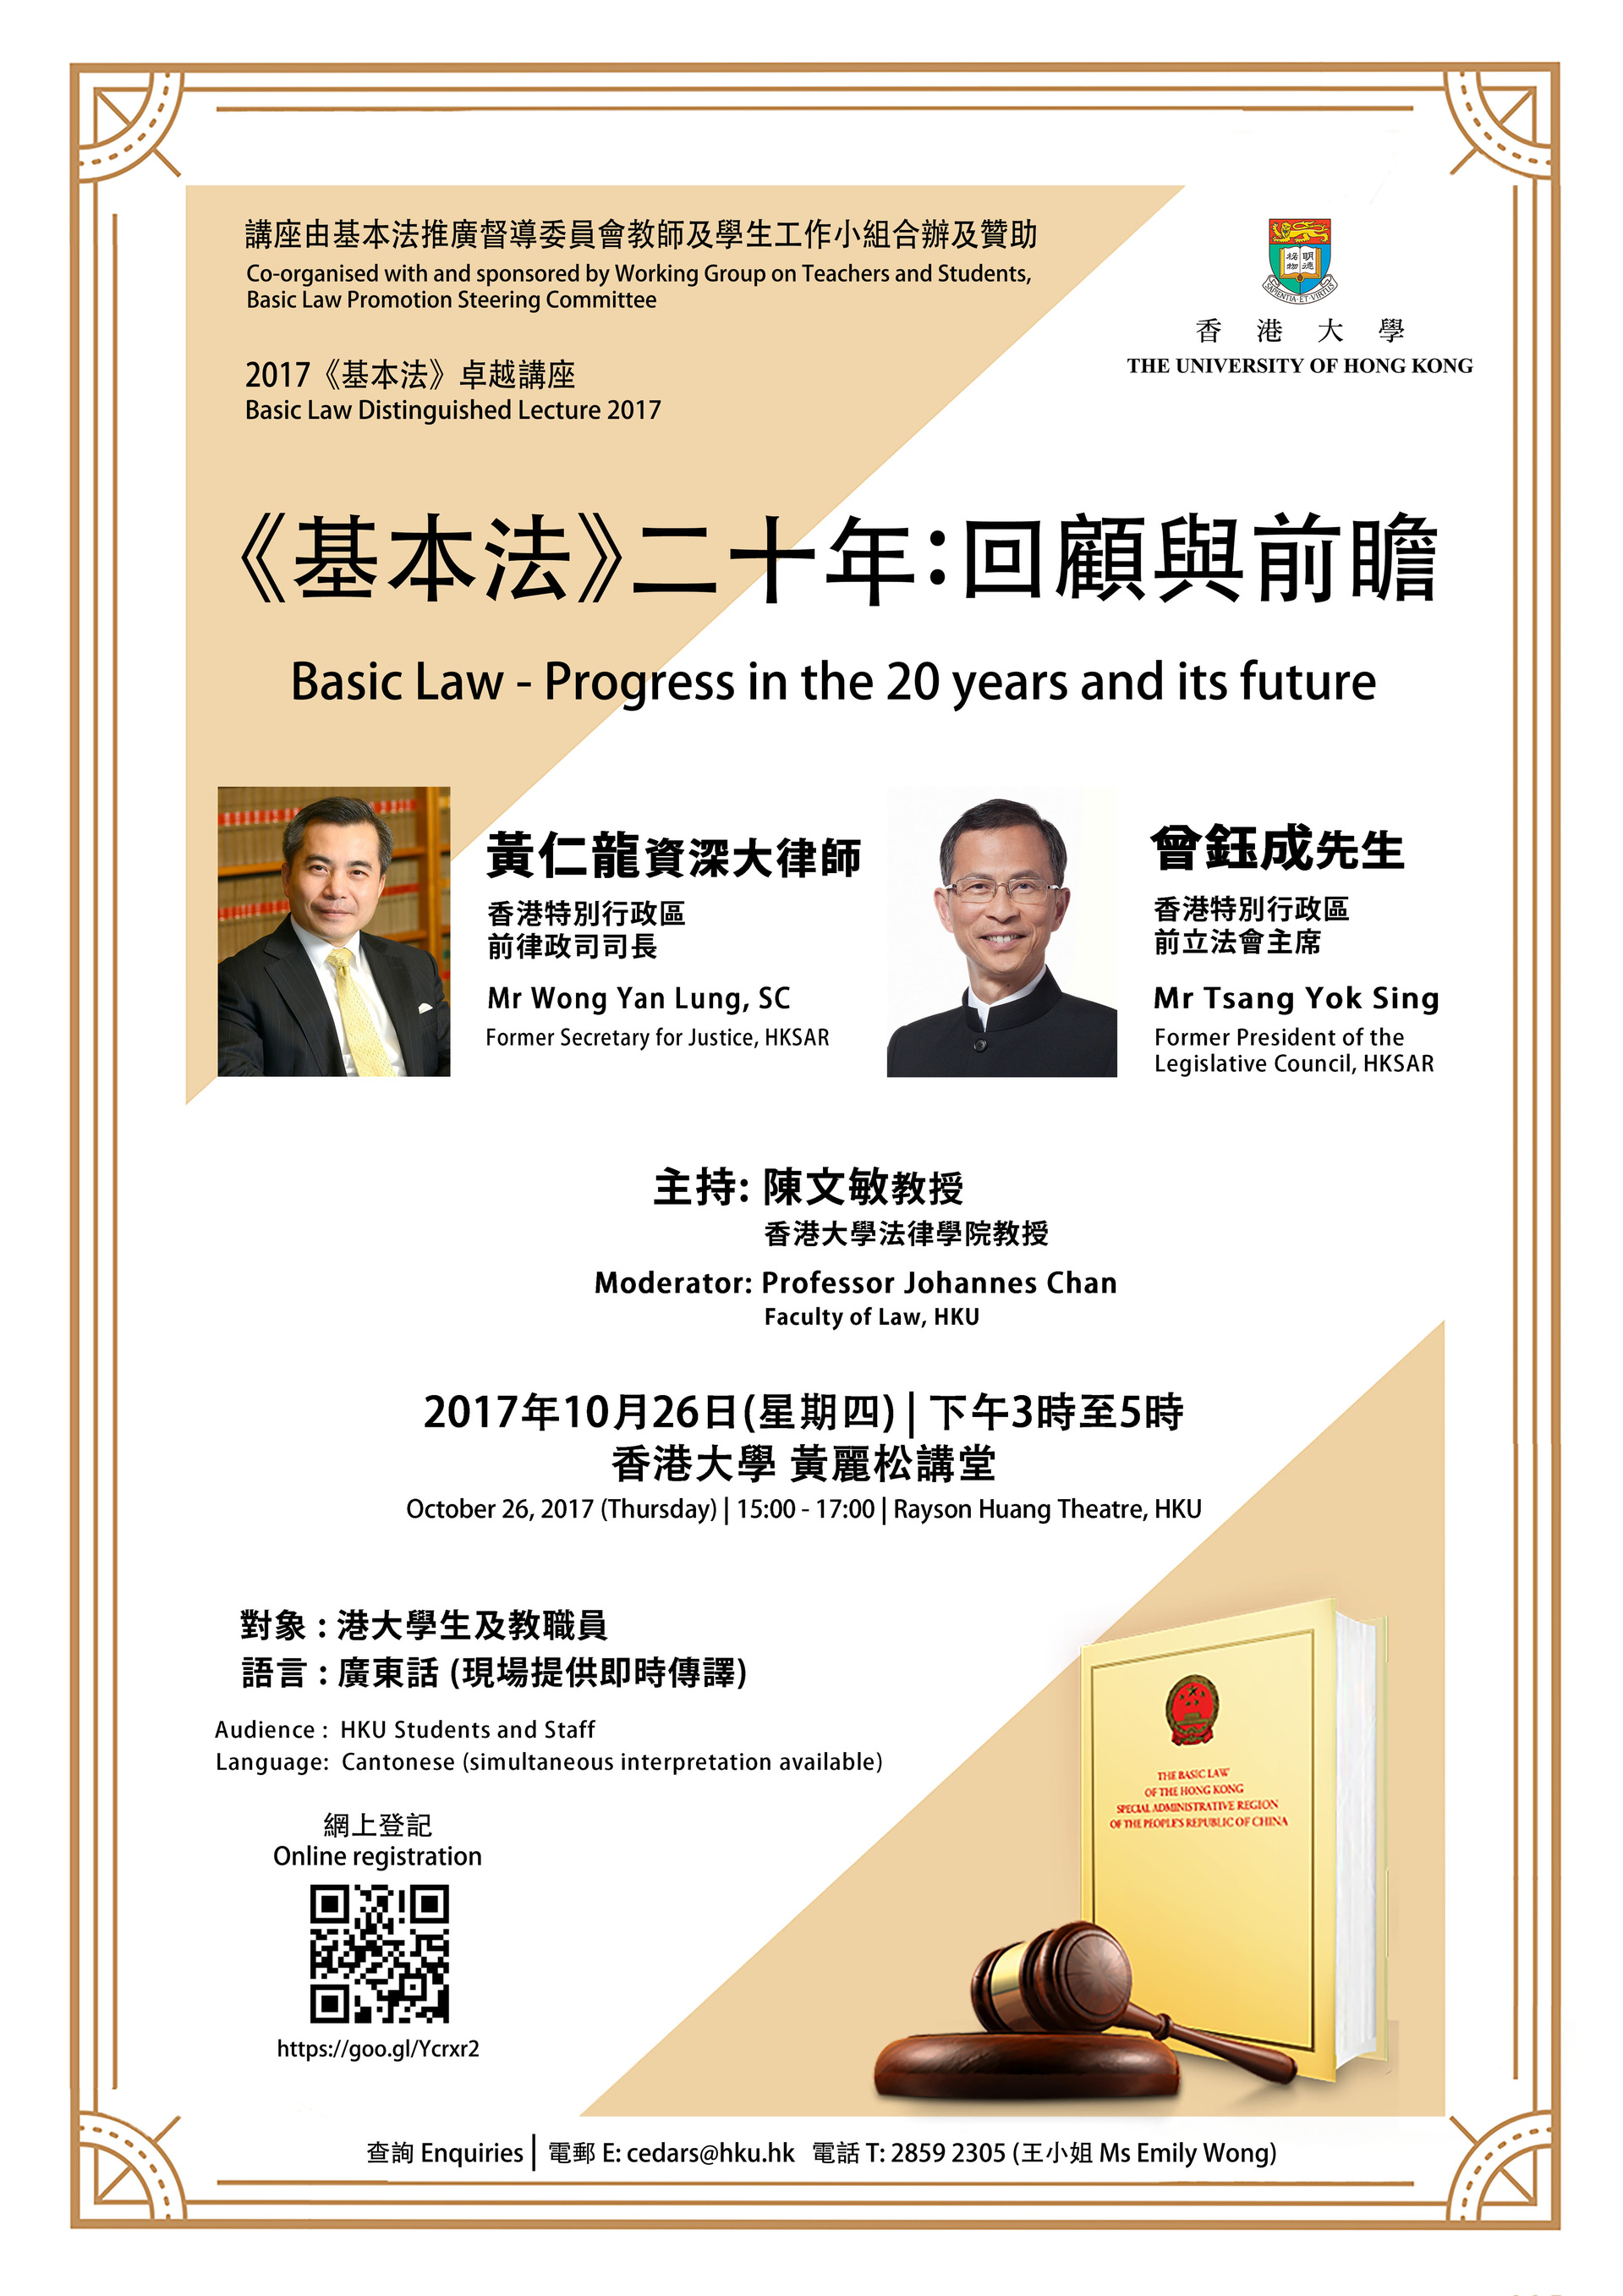 Basic Law Distinguished Lecture 2017: Basic Law - its progress in the last 20 years and its future 